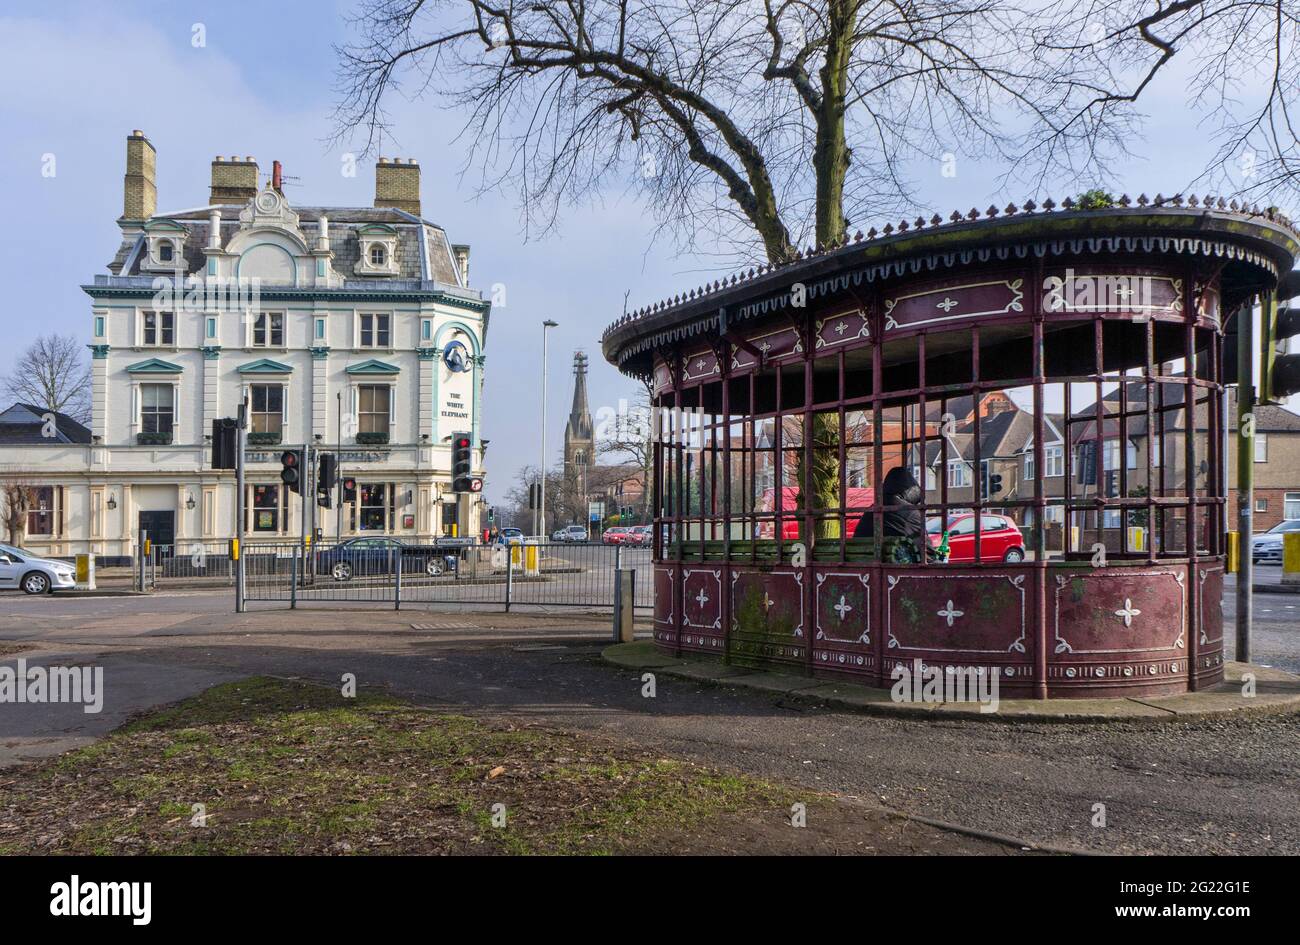 Two local icons, the White Elephant pub and the old tram shelter, Racecourse, Northampton, UK Stock Photo